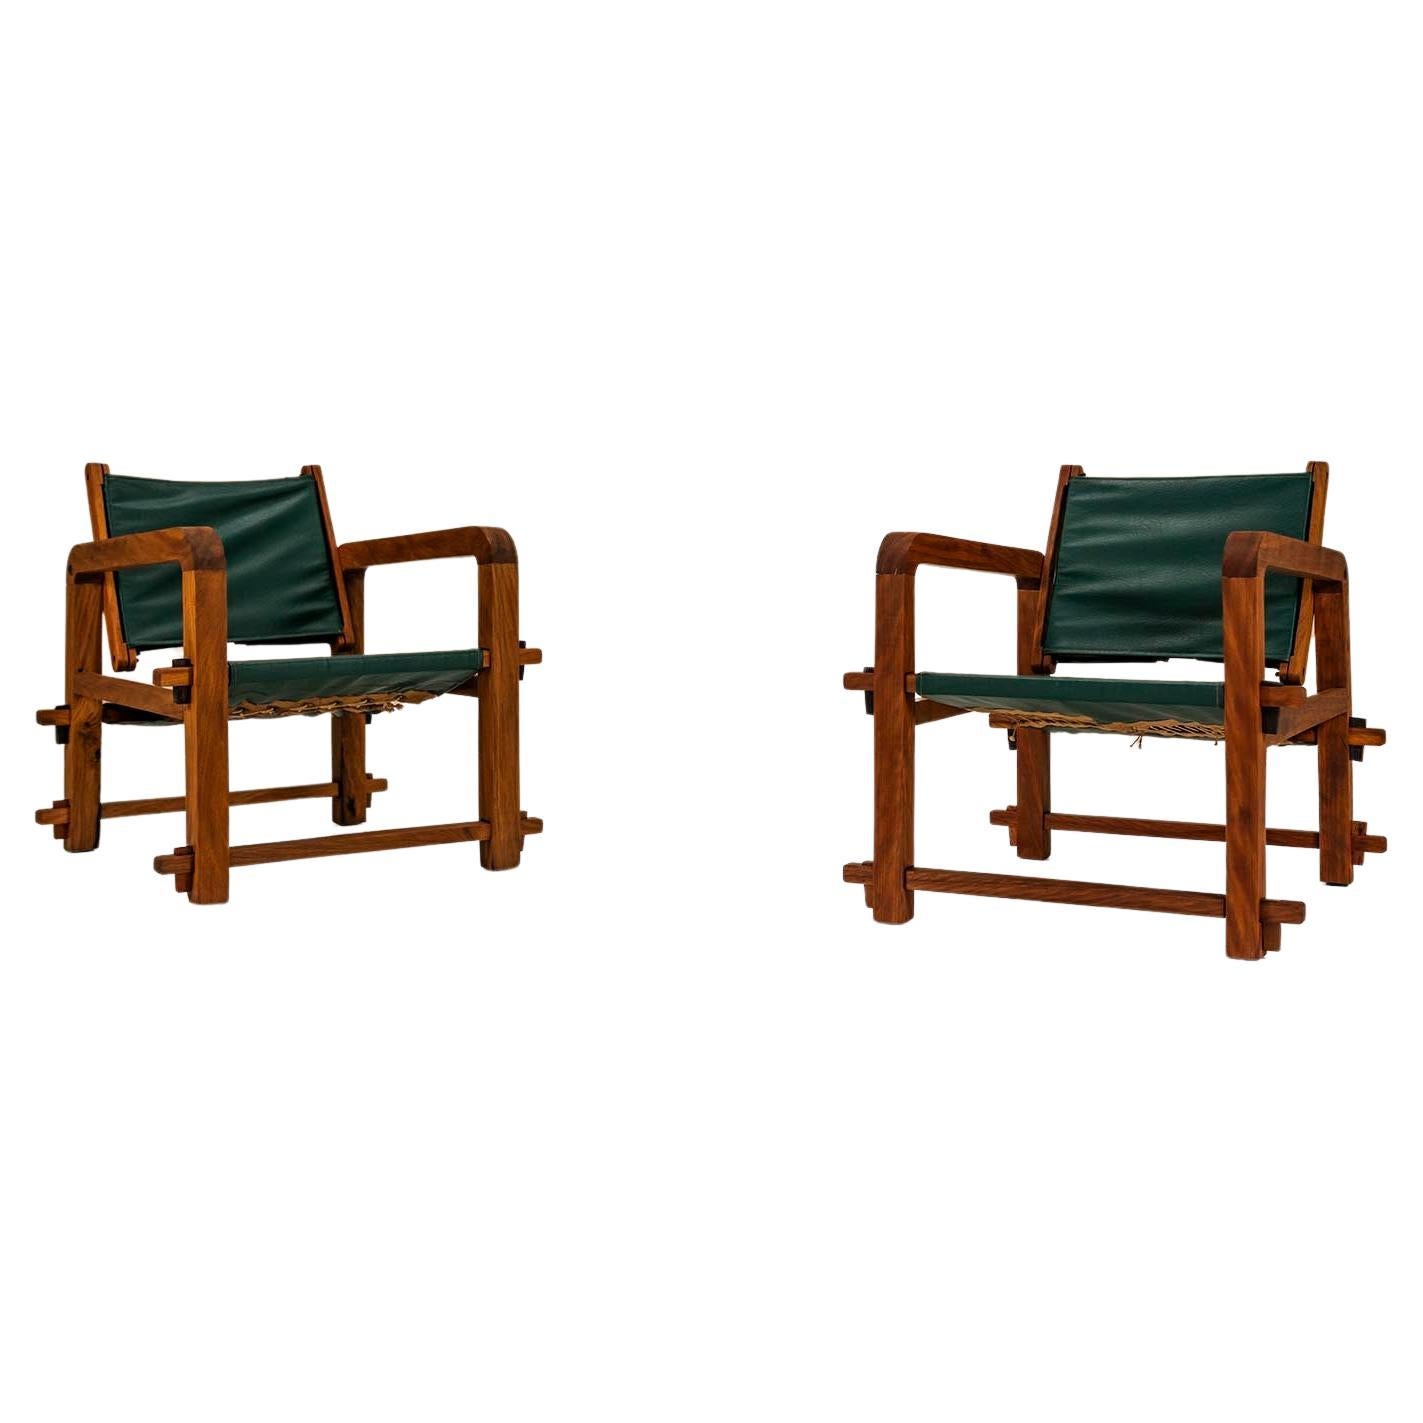 Set Of 2 Sling Chairs In Mahogany And Leather, Brazil 1960s